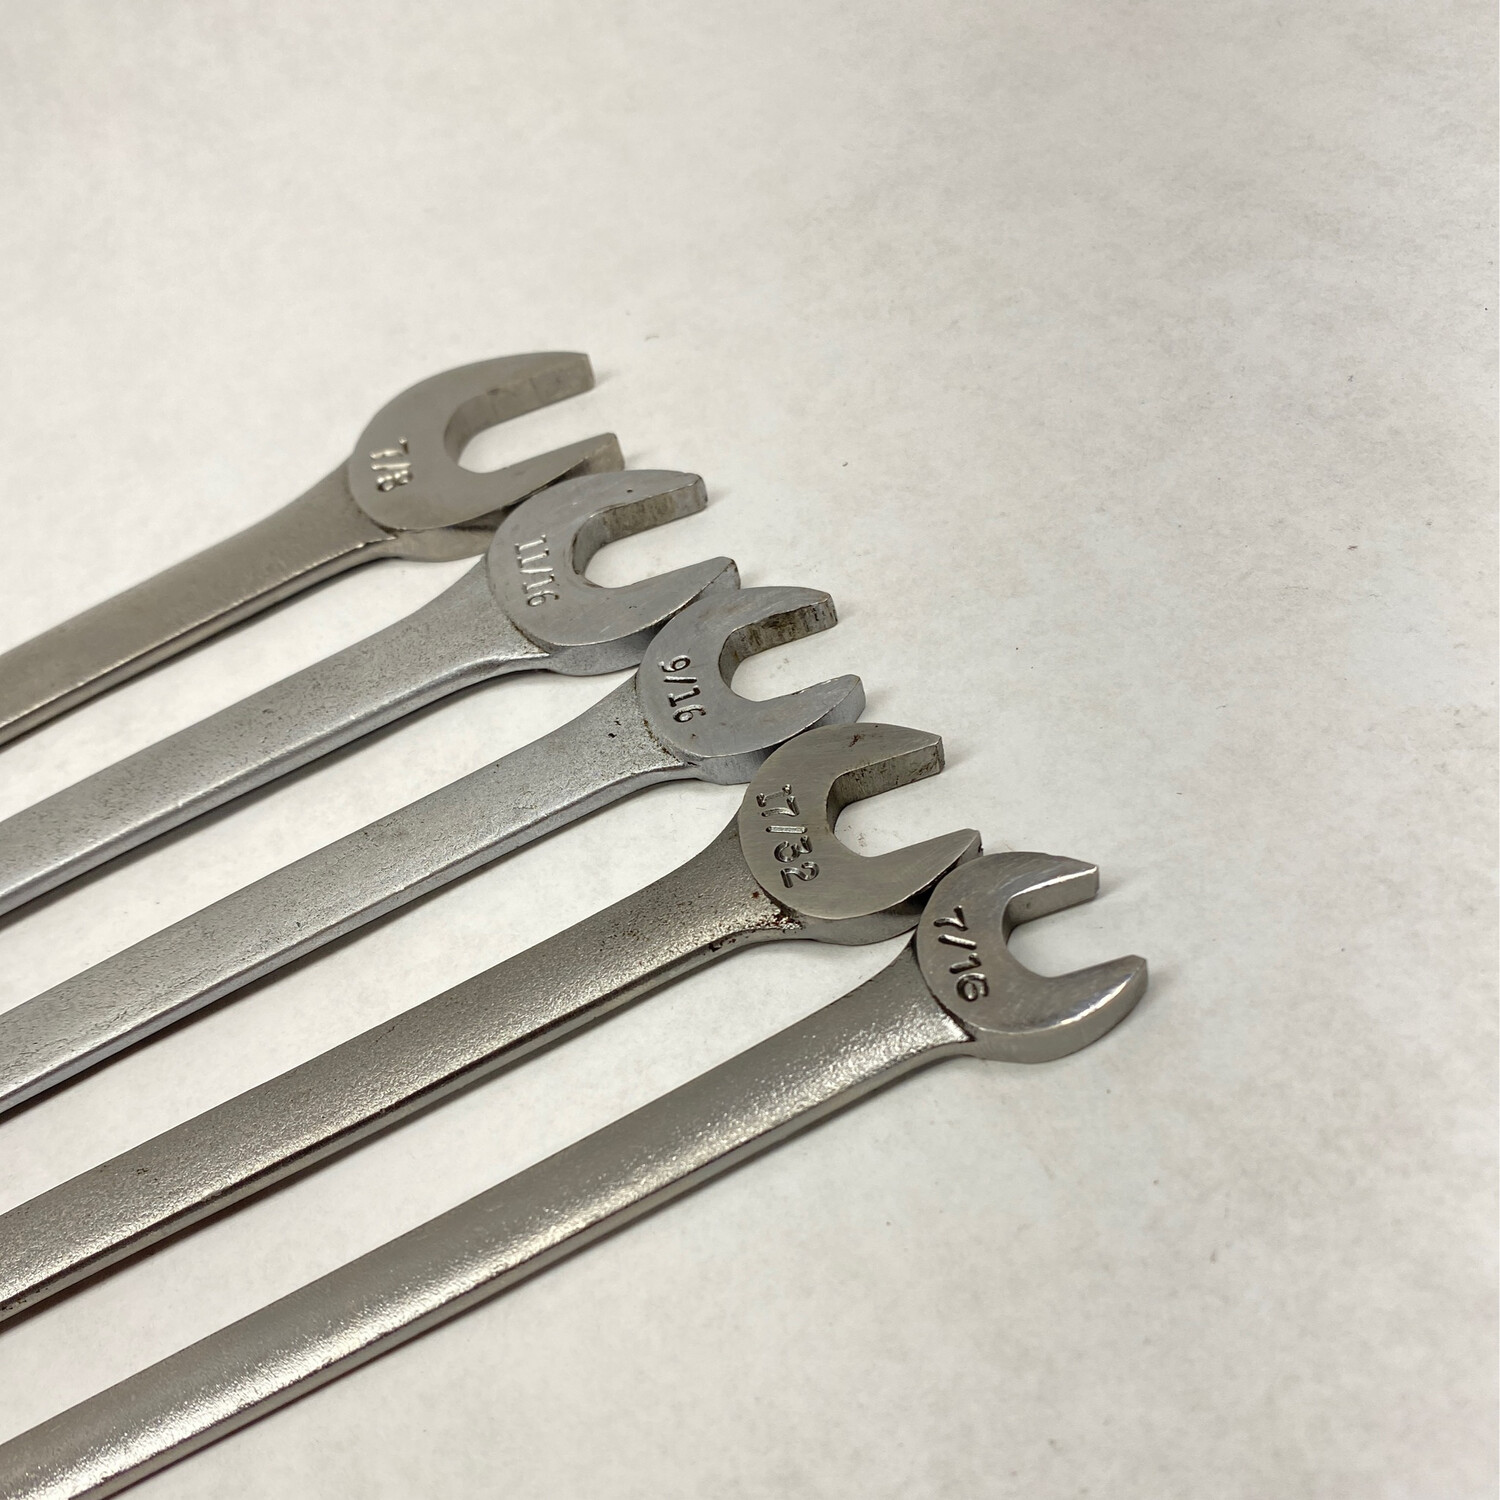 Craftsman 5 Pc. Thin Tappet Double Open End Wrench Set,